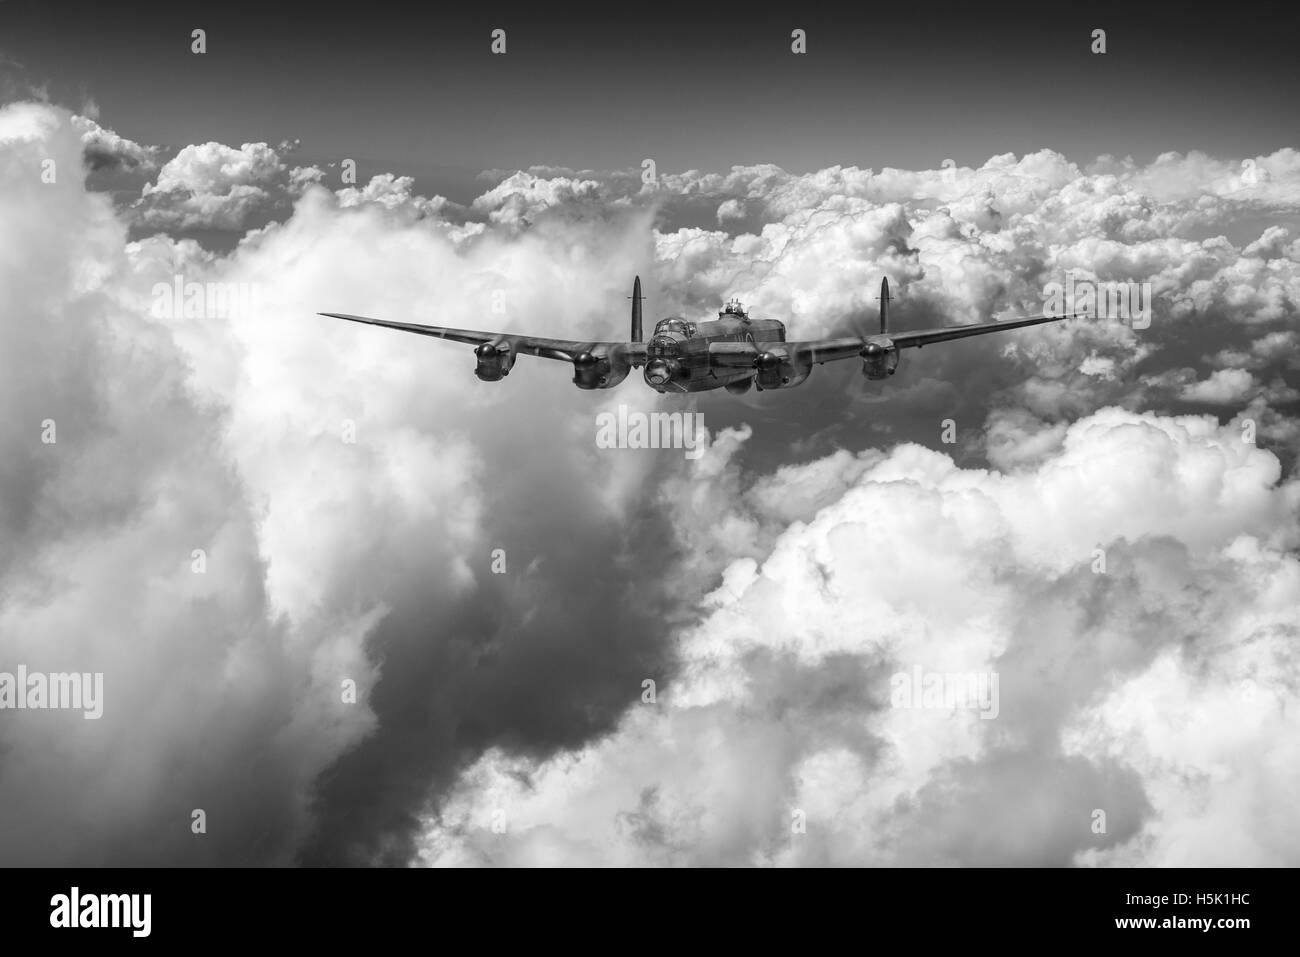 A depiction of a solitary RAF Avro Lancaster bomber making its way through sunlit clouds in July 1944. Black and white version. Stock Photo